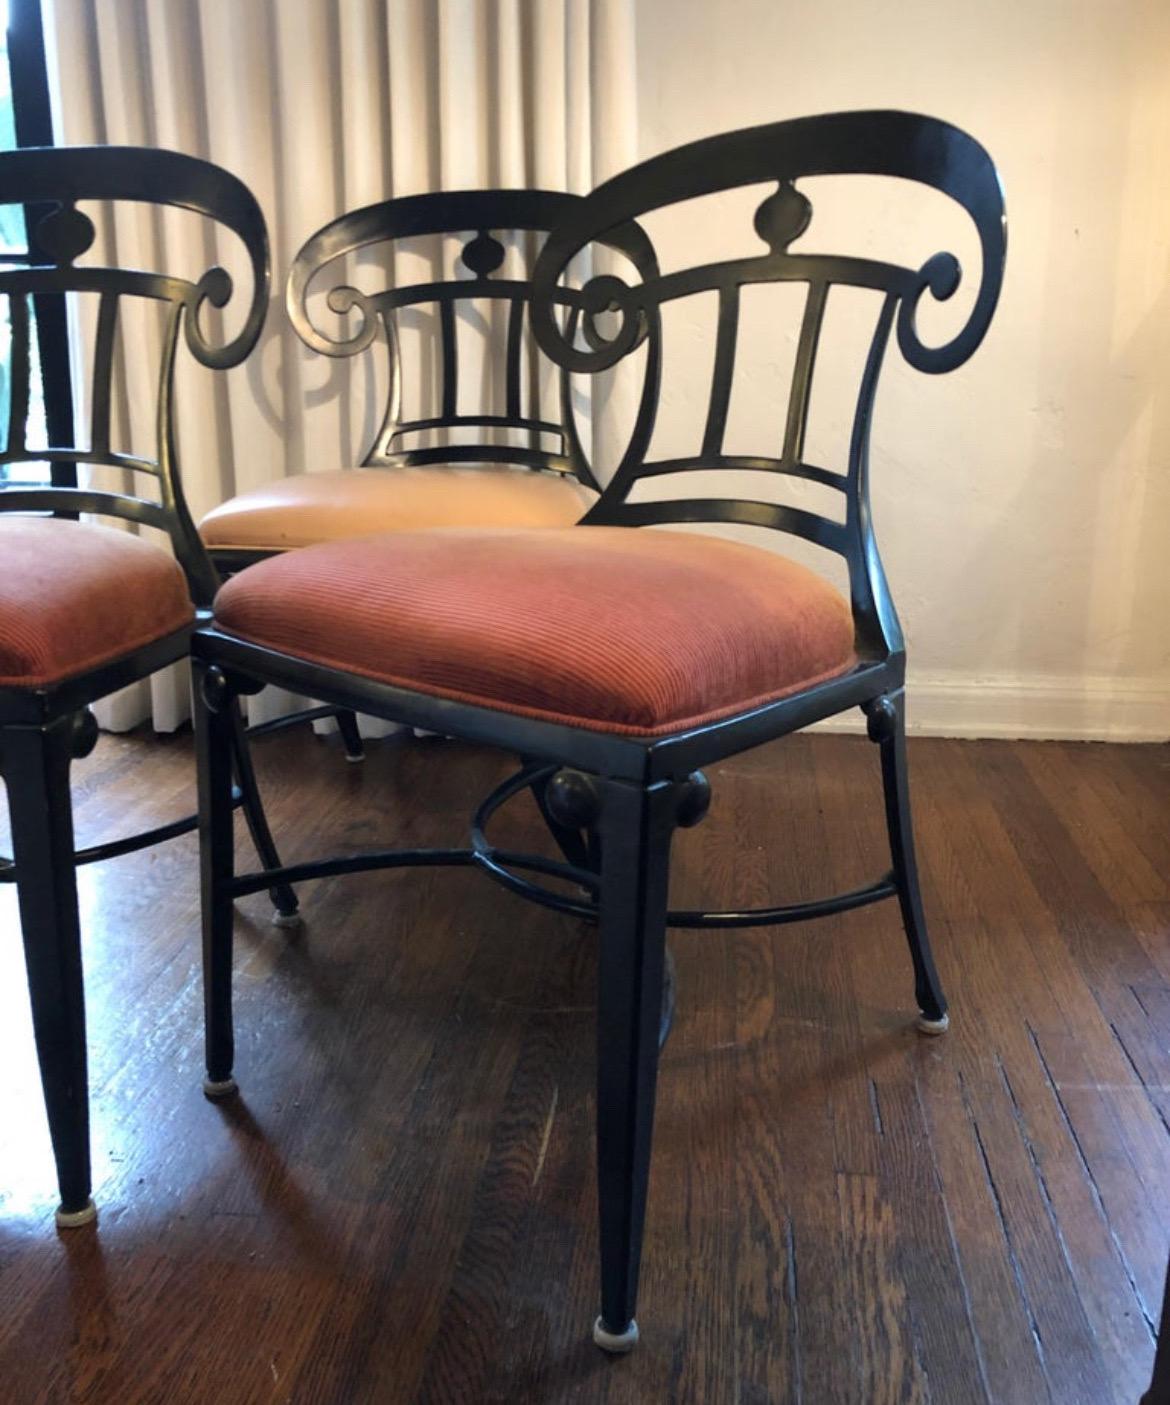 Set of 3 vintage MCM Veneman dining indoor/outdoor chairs.
Mid-Century Modern Mediterranean style with scroll design.

2 chairs have muted burnt red fabric and 1 has tan leather upholstery.